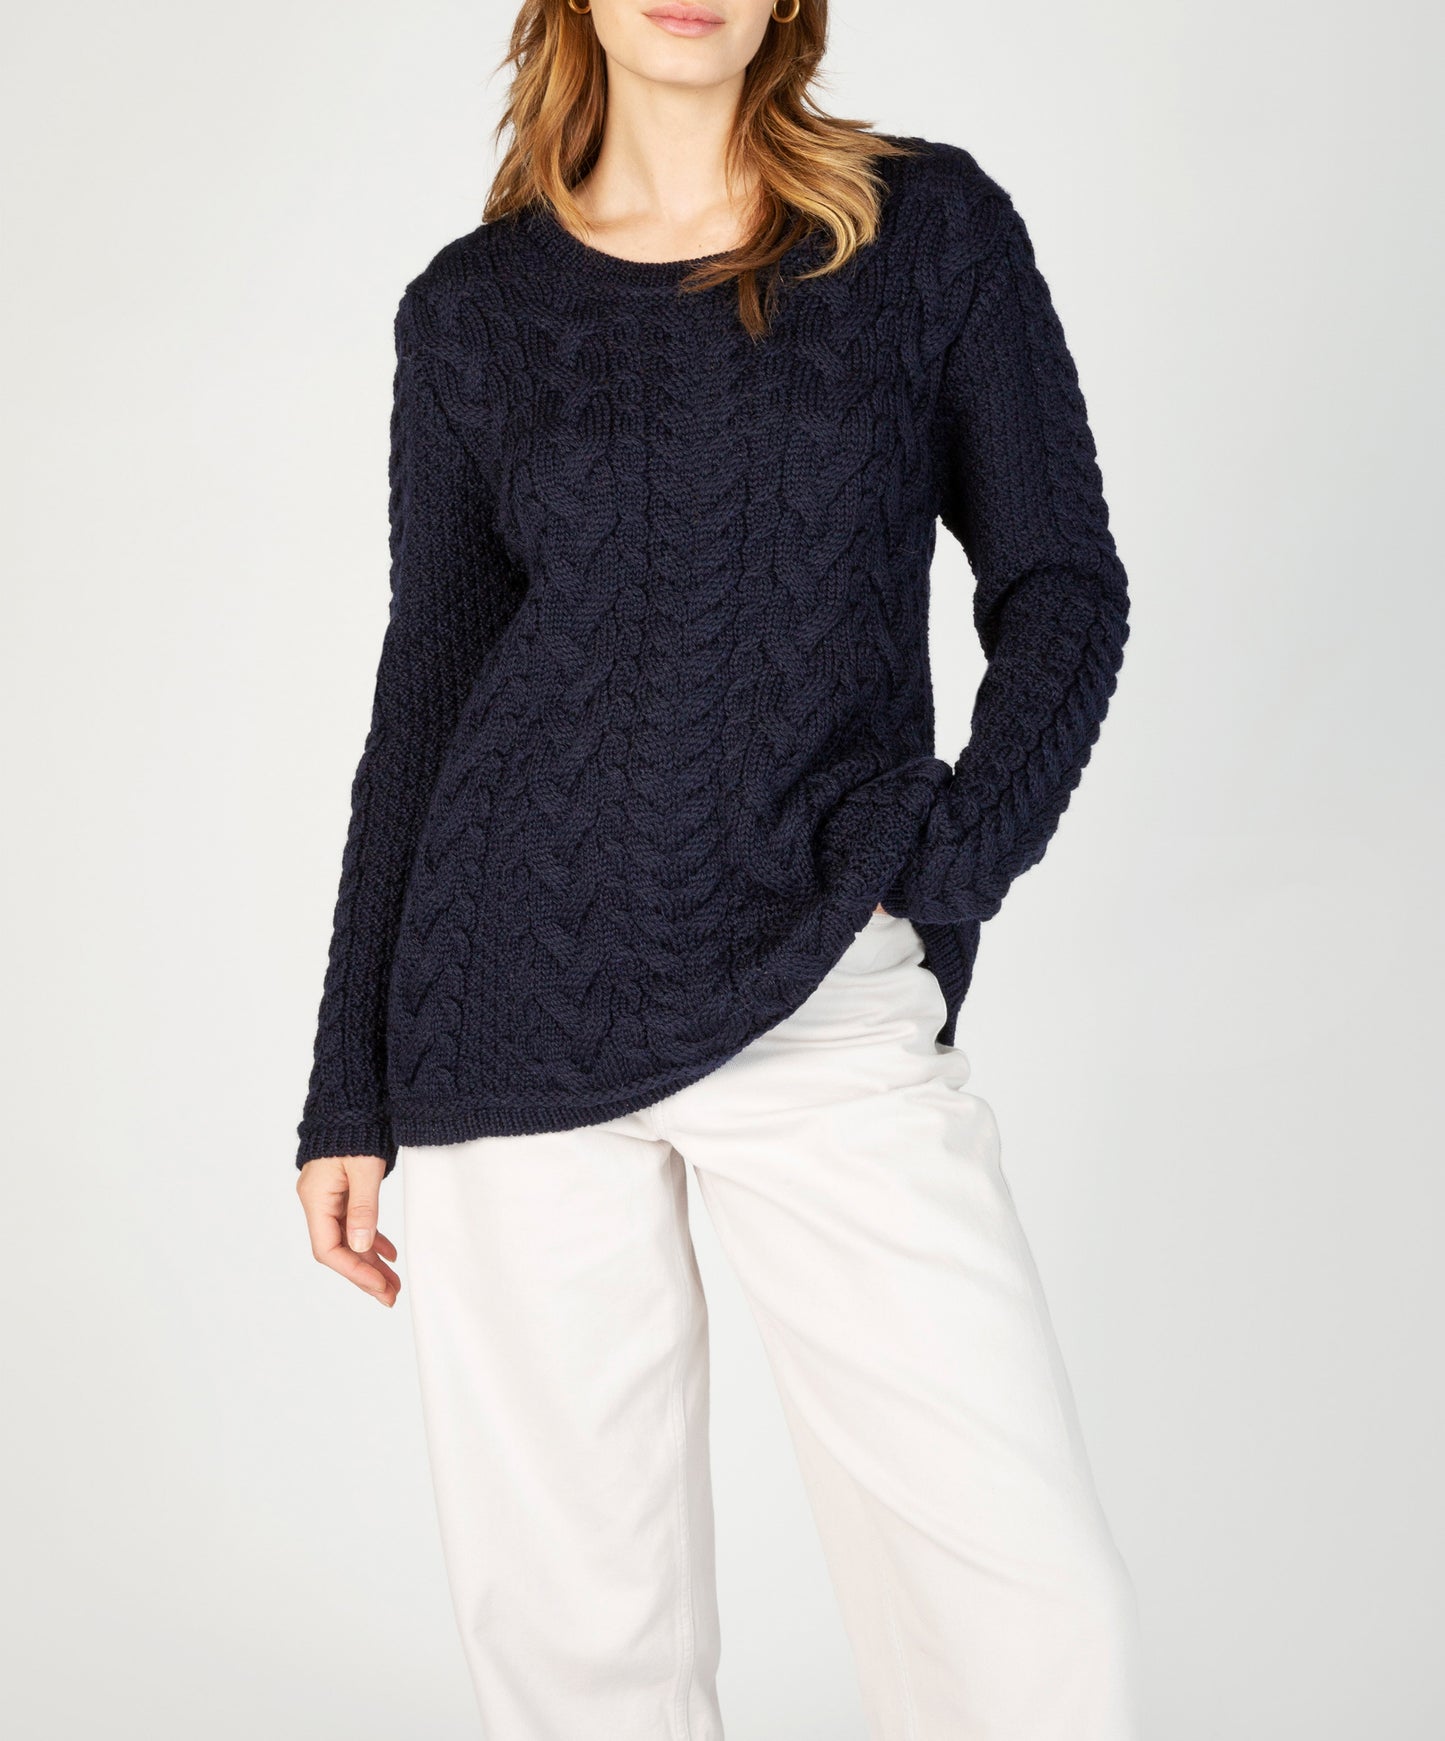 IrelandsEye Knitwear Primose A-Line Cable Round Neck Sweater Navy